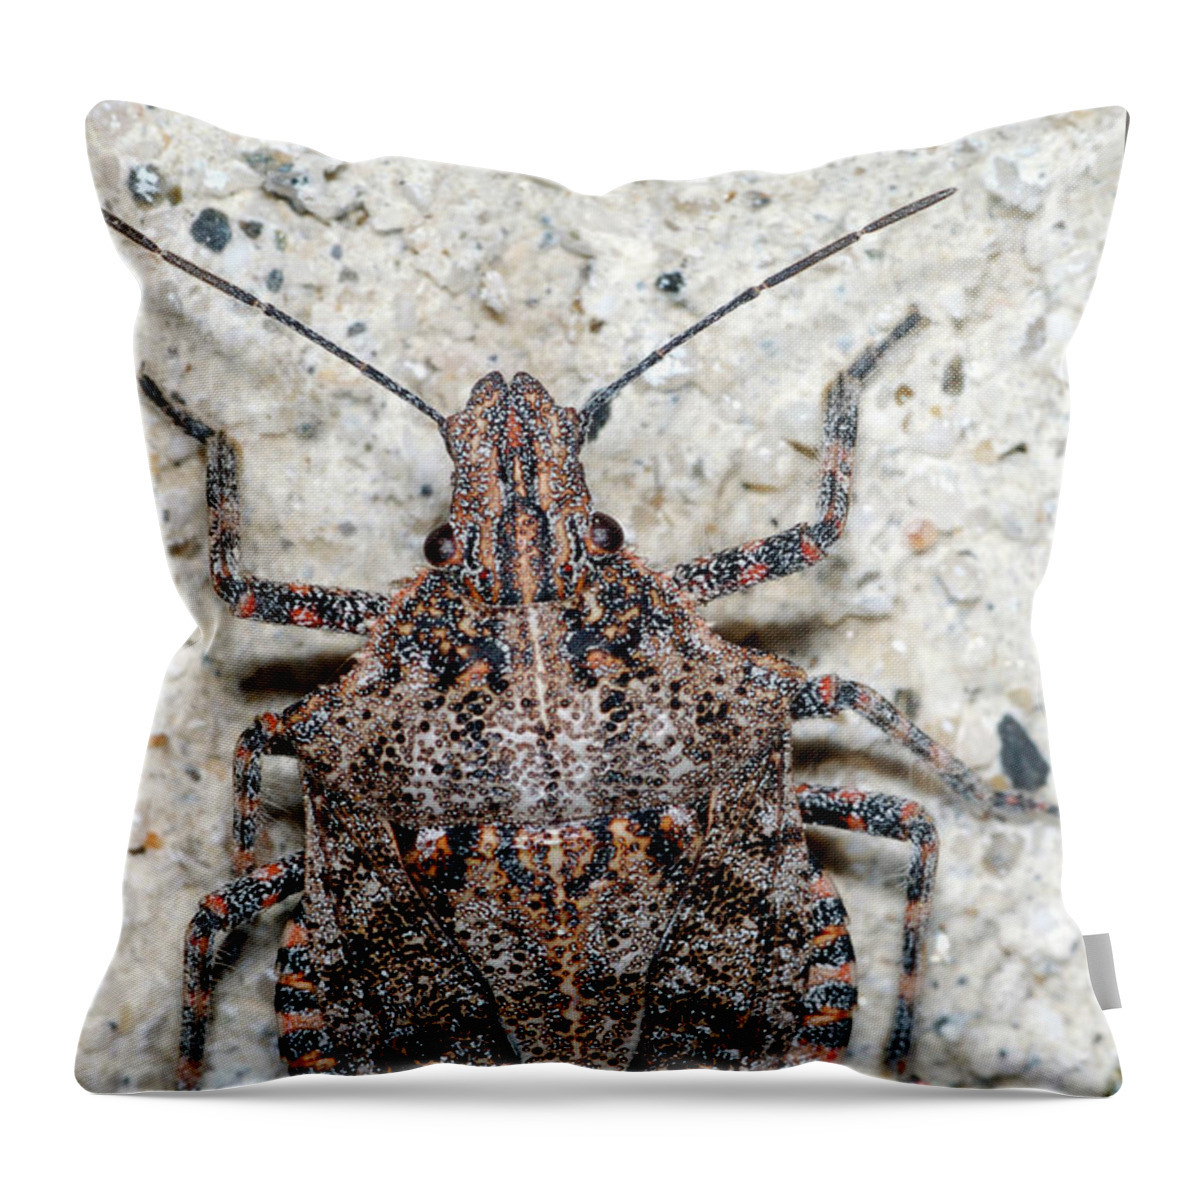 Stink Bug Throw Pillow featuring the photograph Stink Bug #3 by Breck Bartholomew